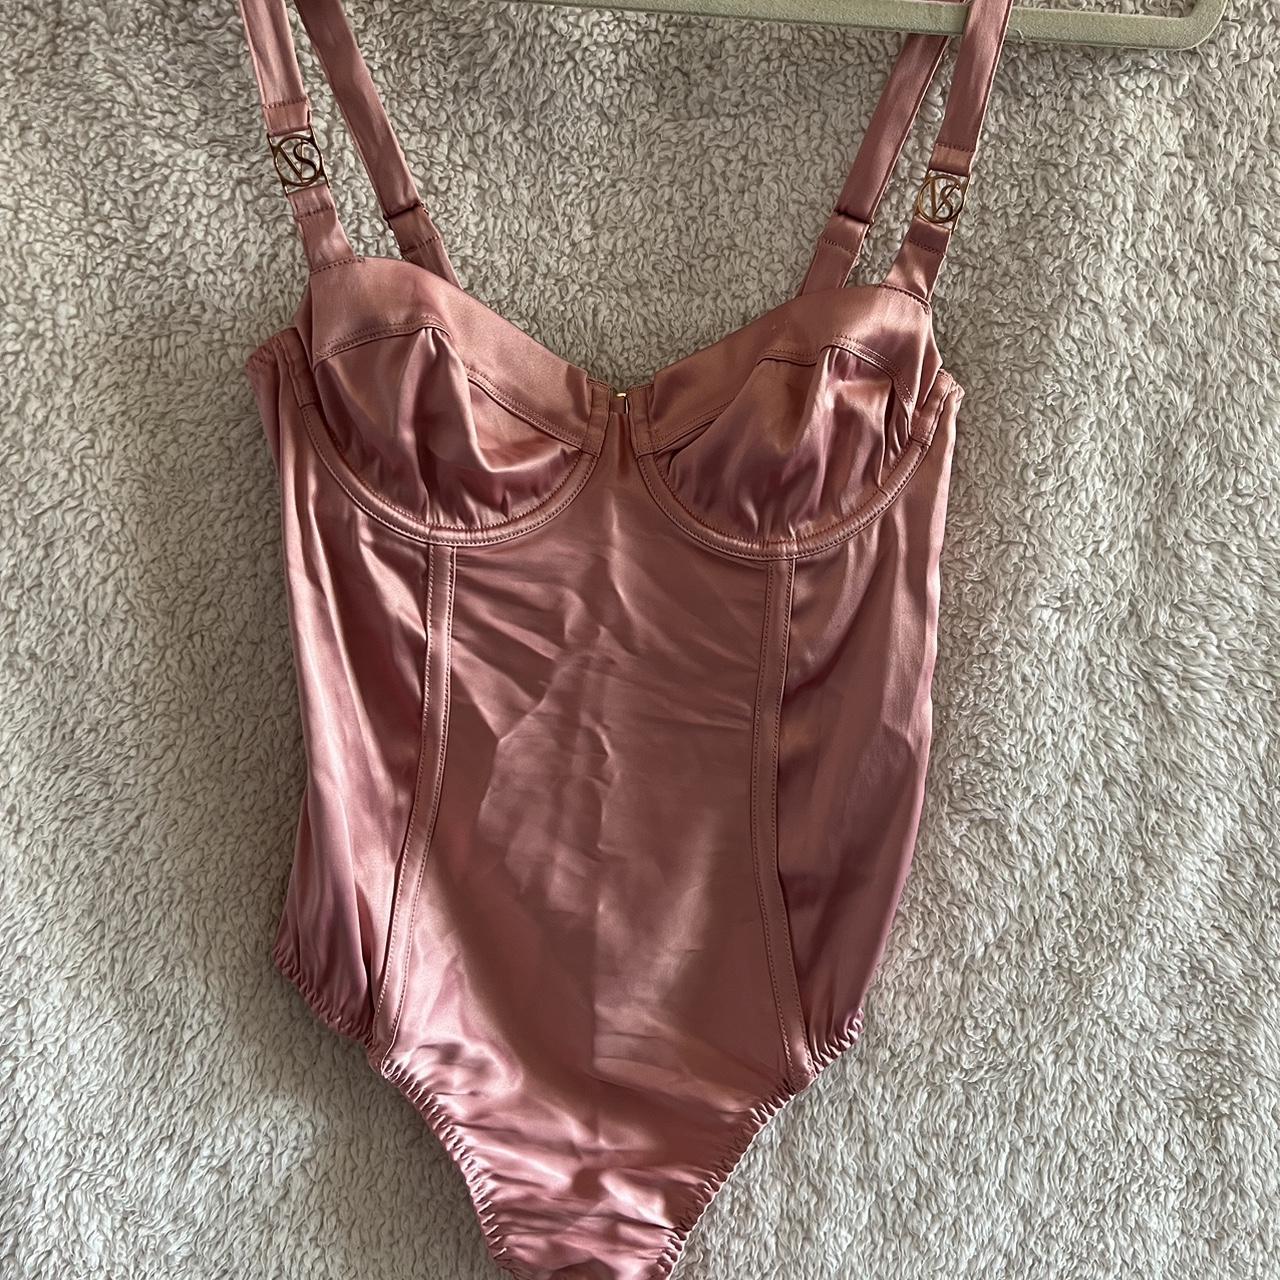 🎀TWO COLORS AVAILABLE NEW🎀 PINK (Victoria Secret) - Depop